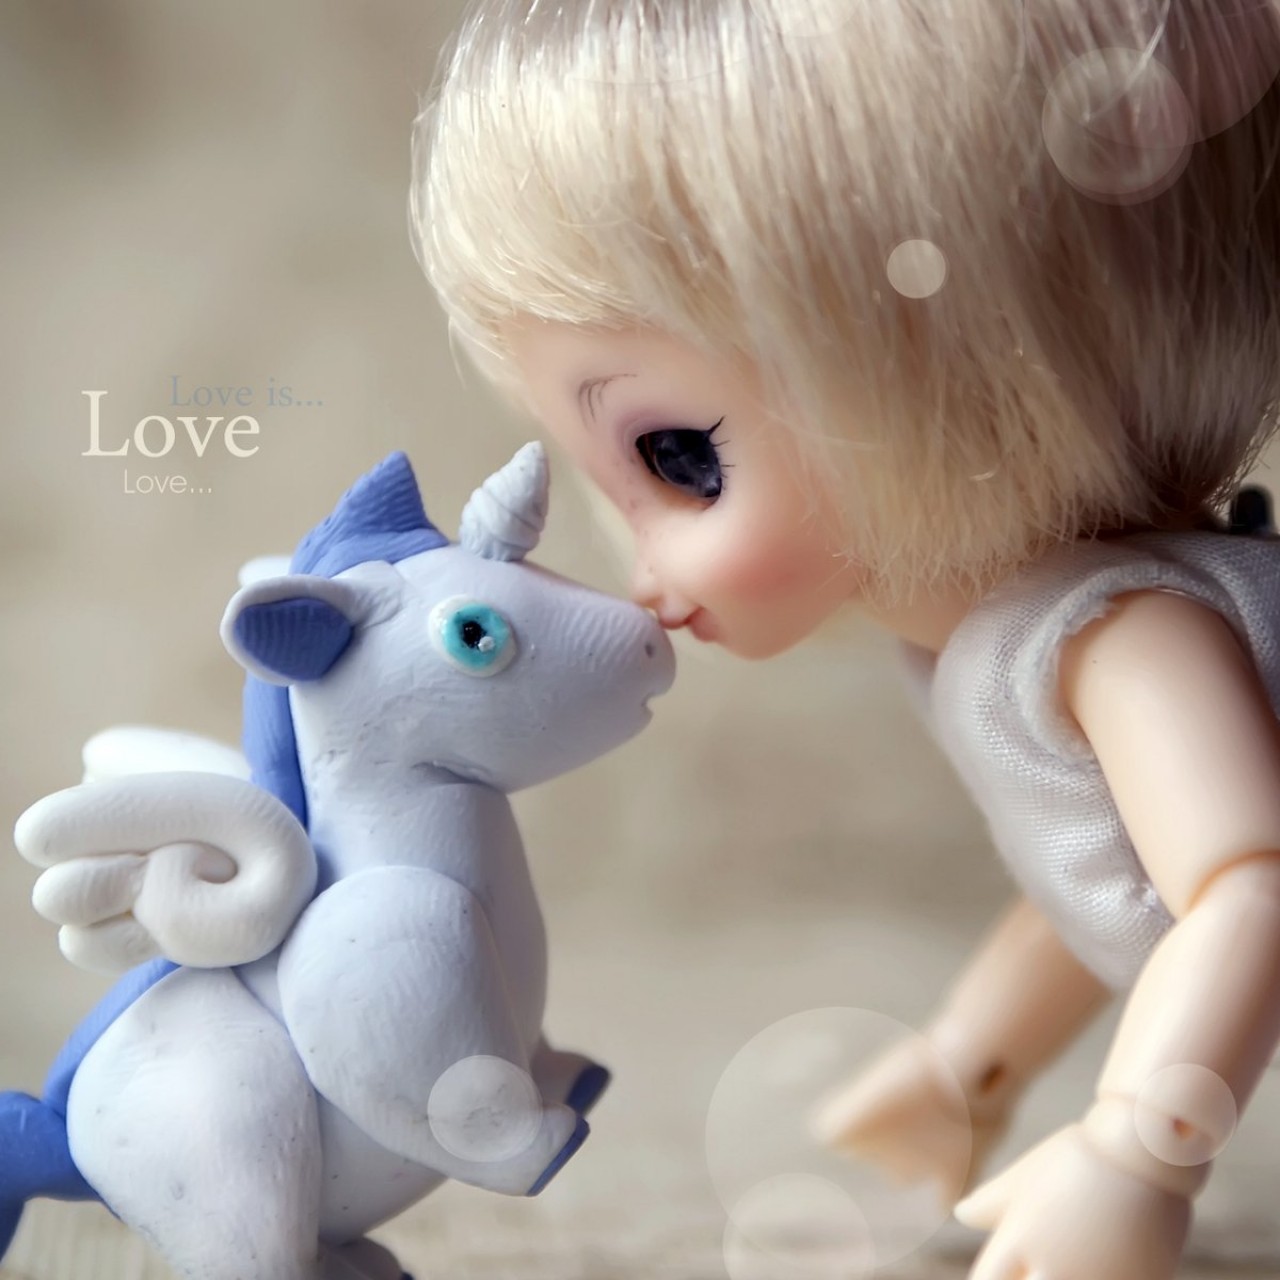 Free download Cute Doll Wallpapers For Love Cute Kiss Dolls All ...